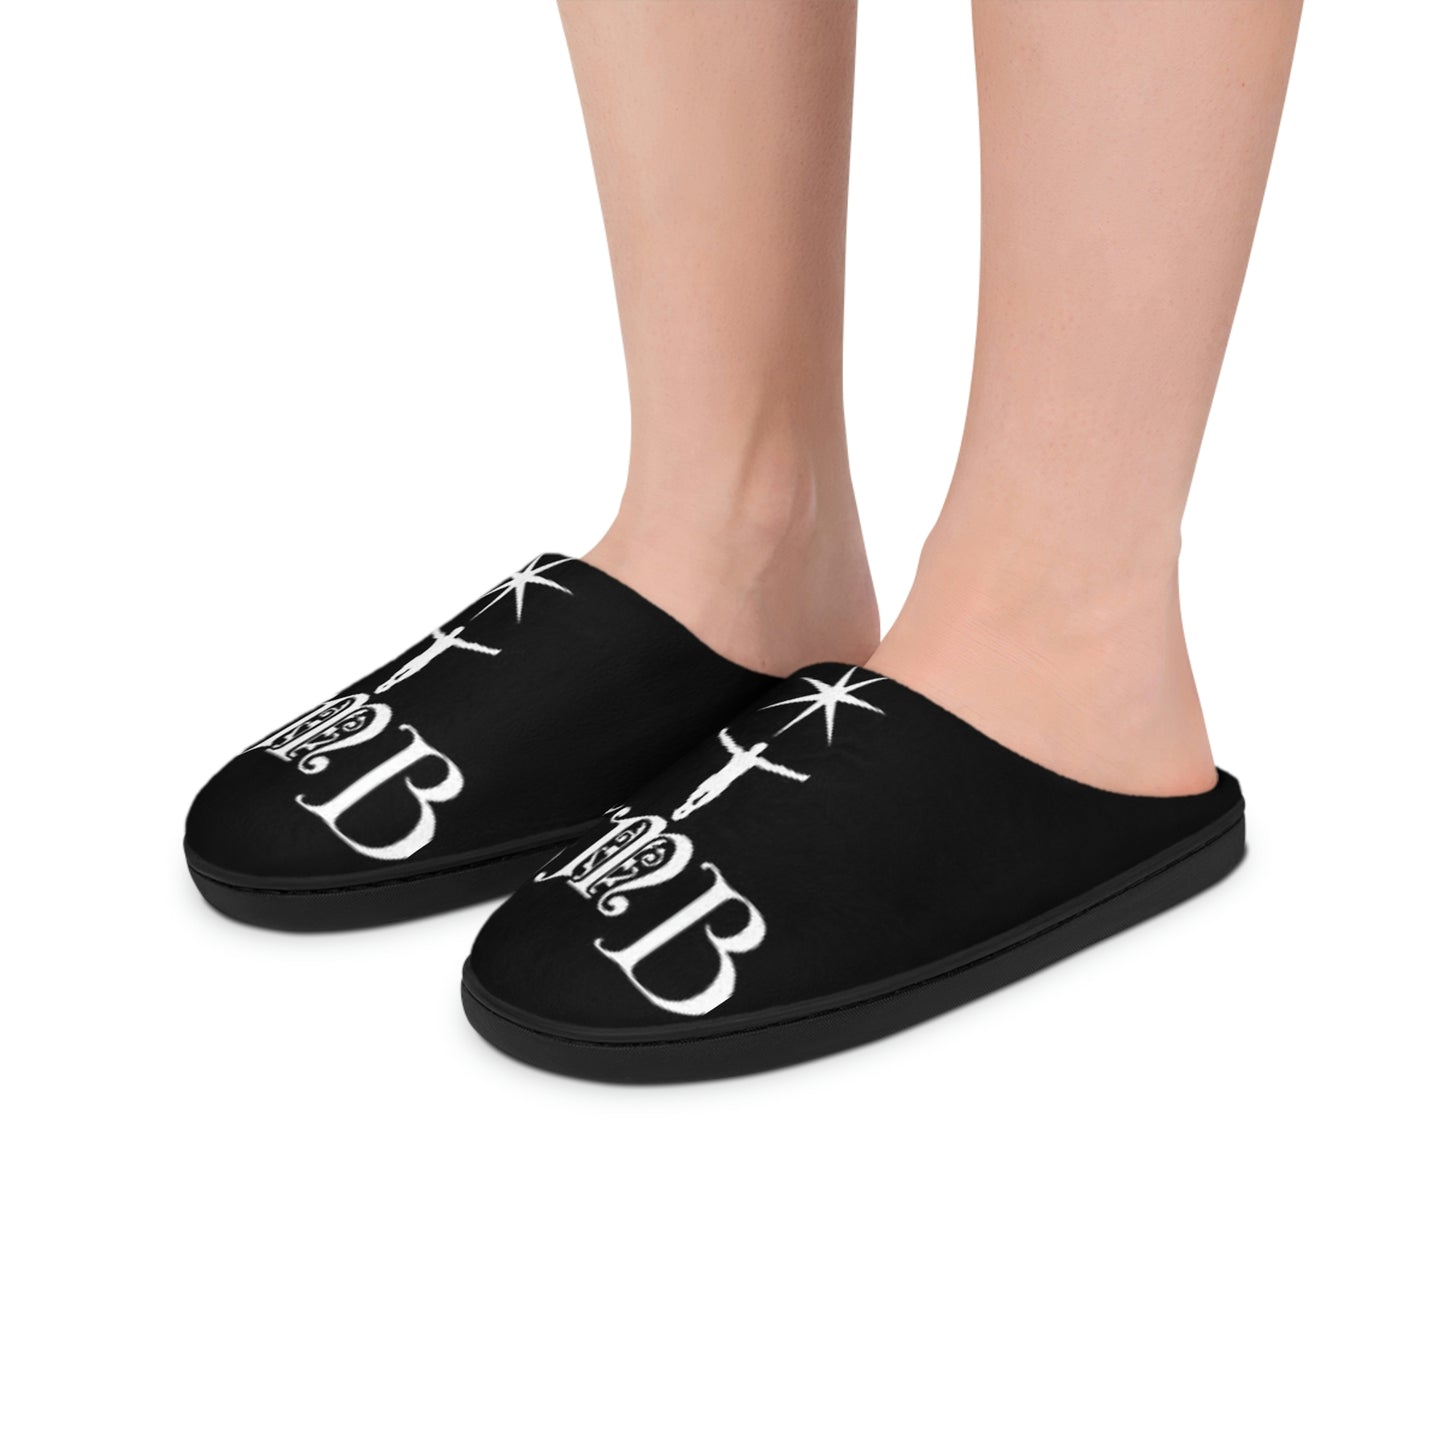 Blk Moore Slippers